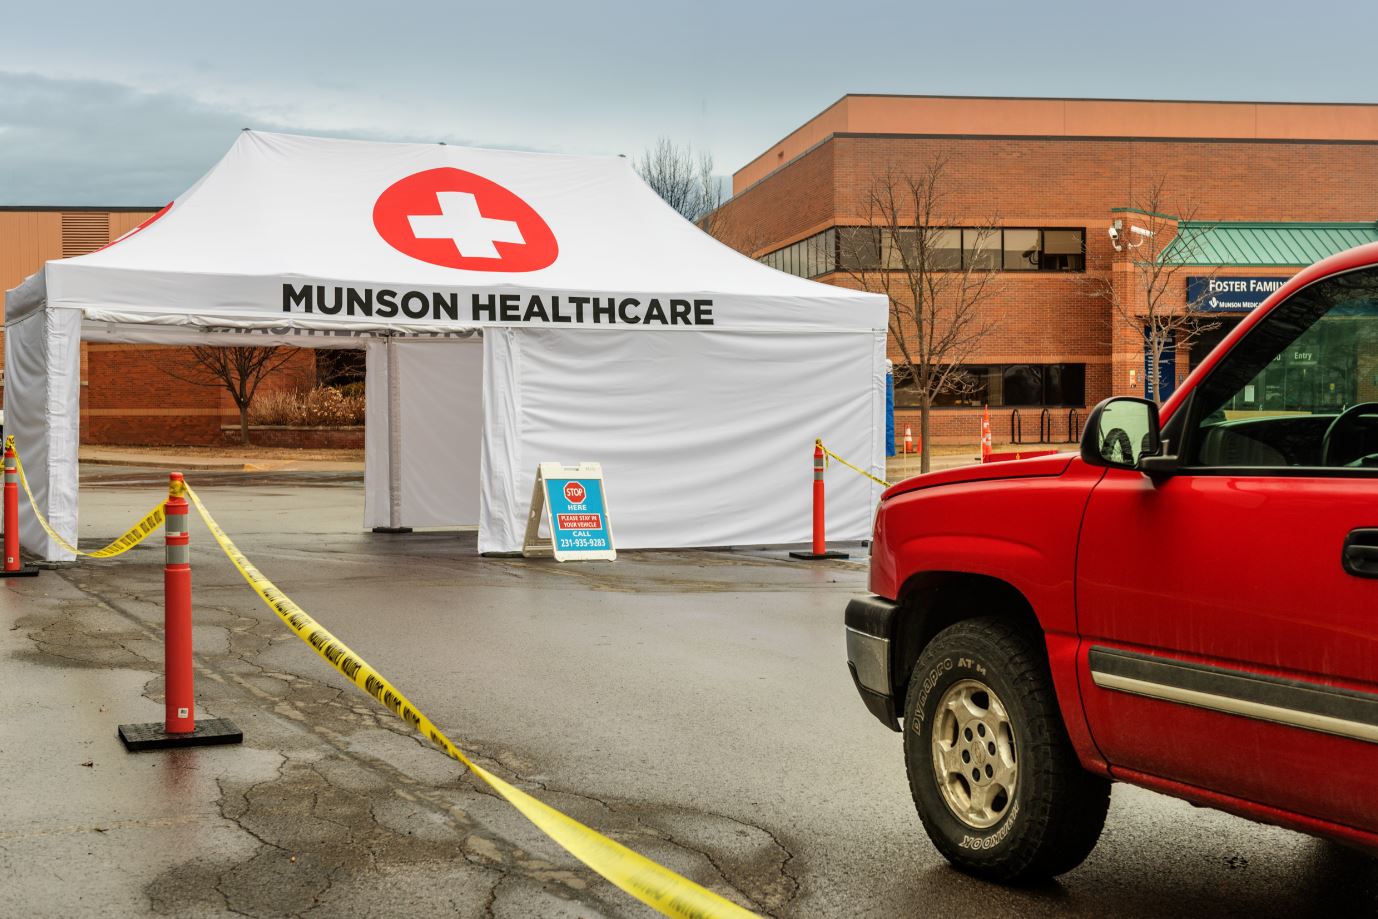 Munson healthcare drive through tent in parking lot in front of building